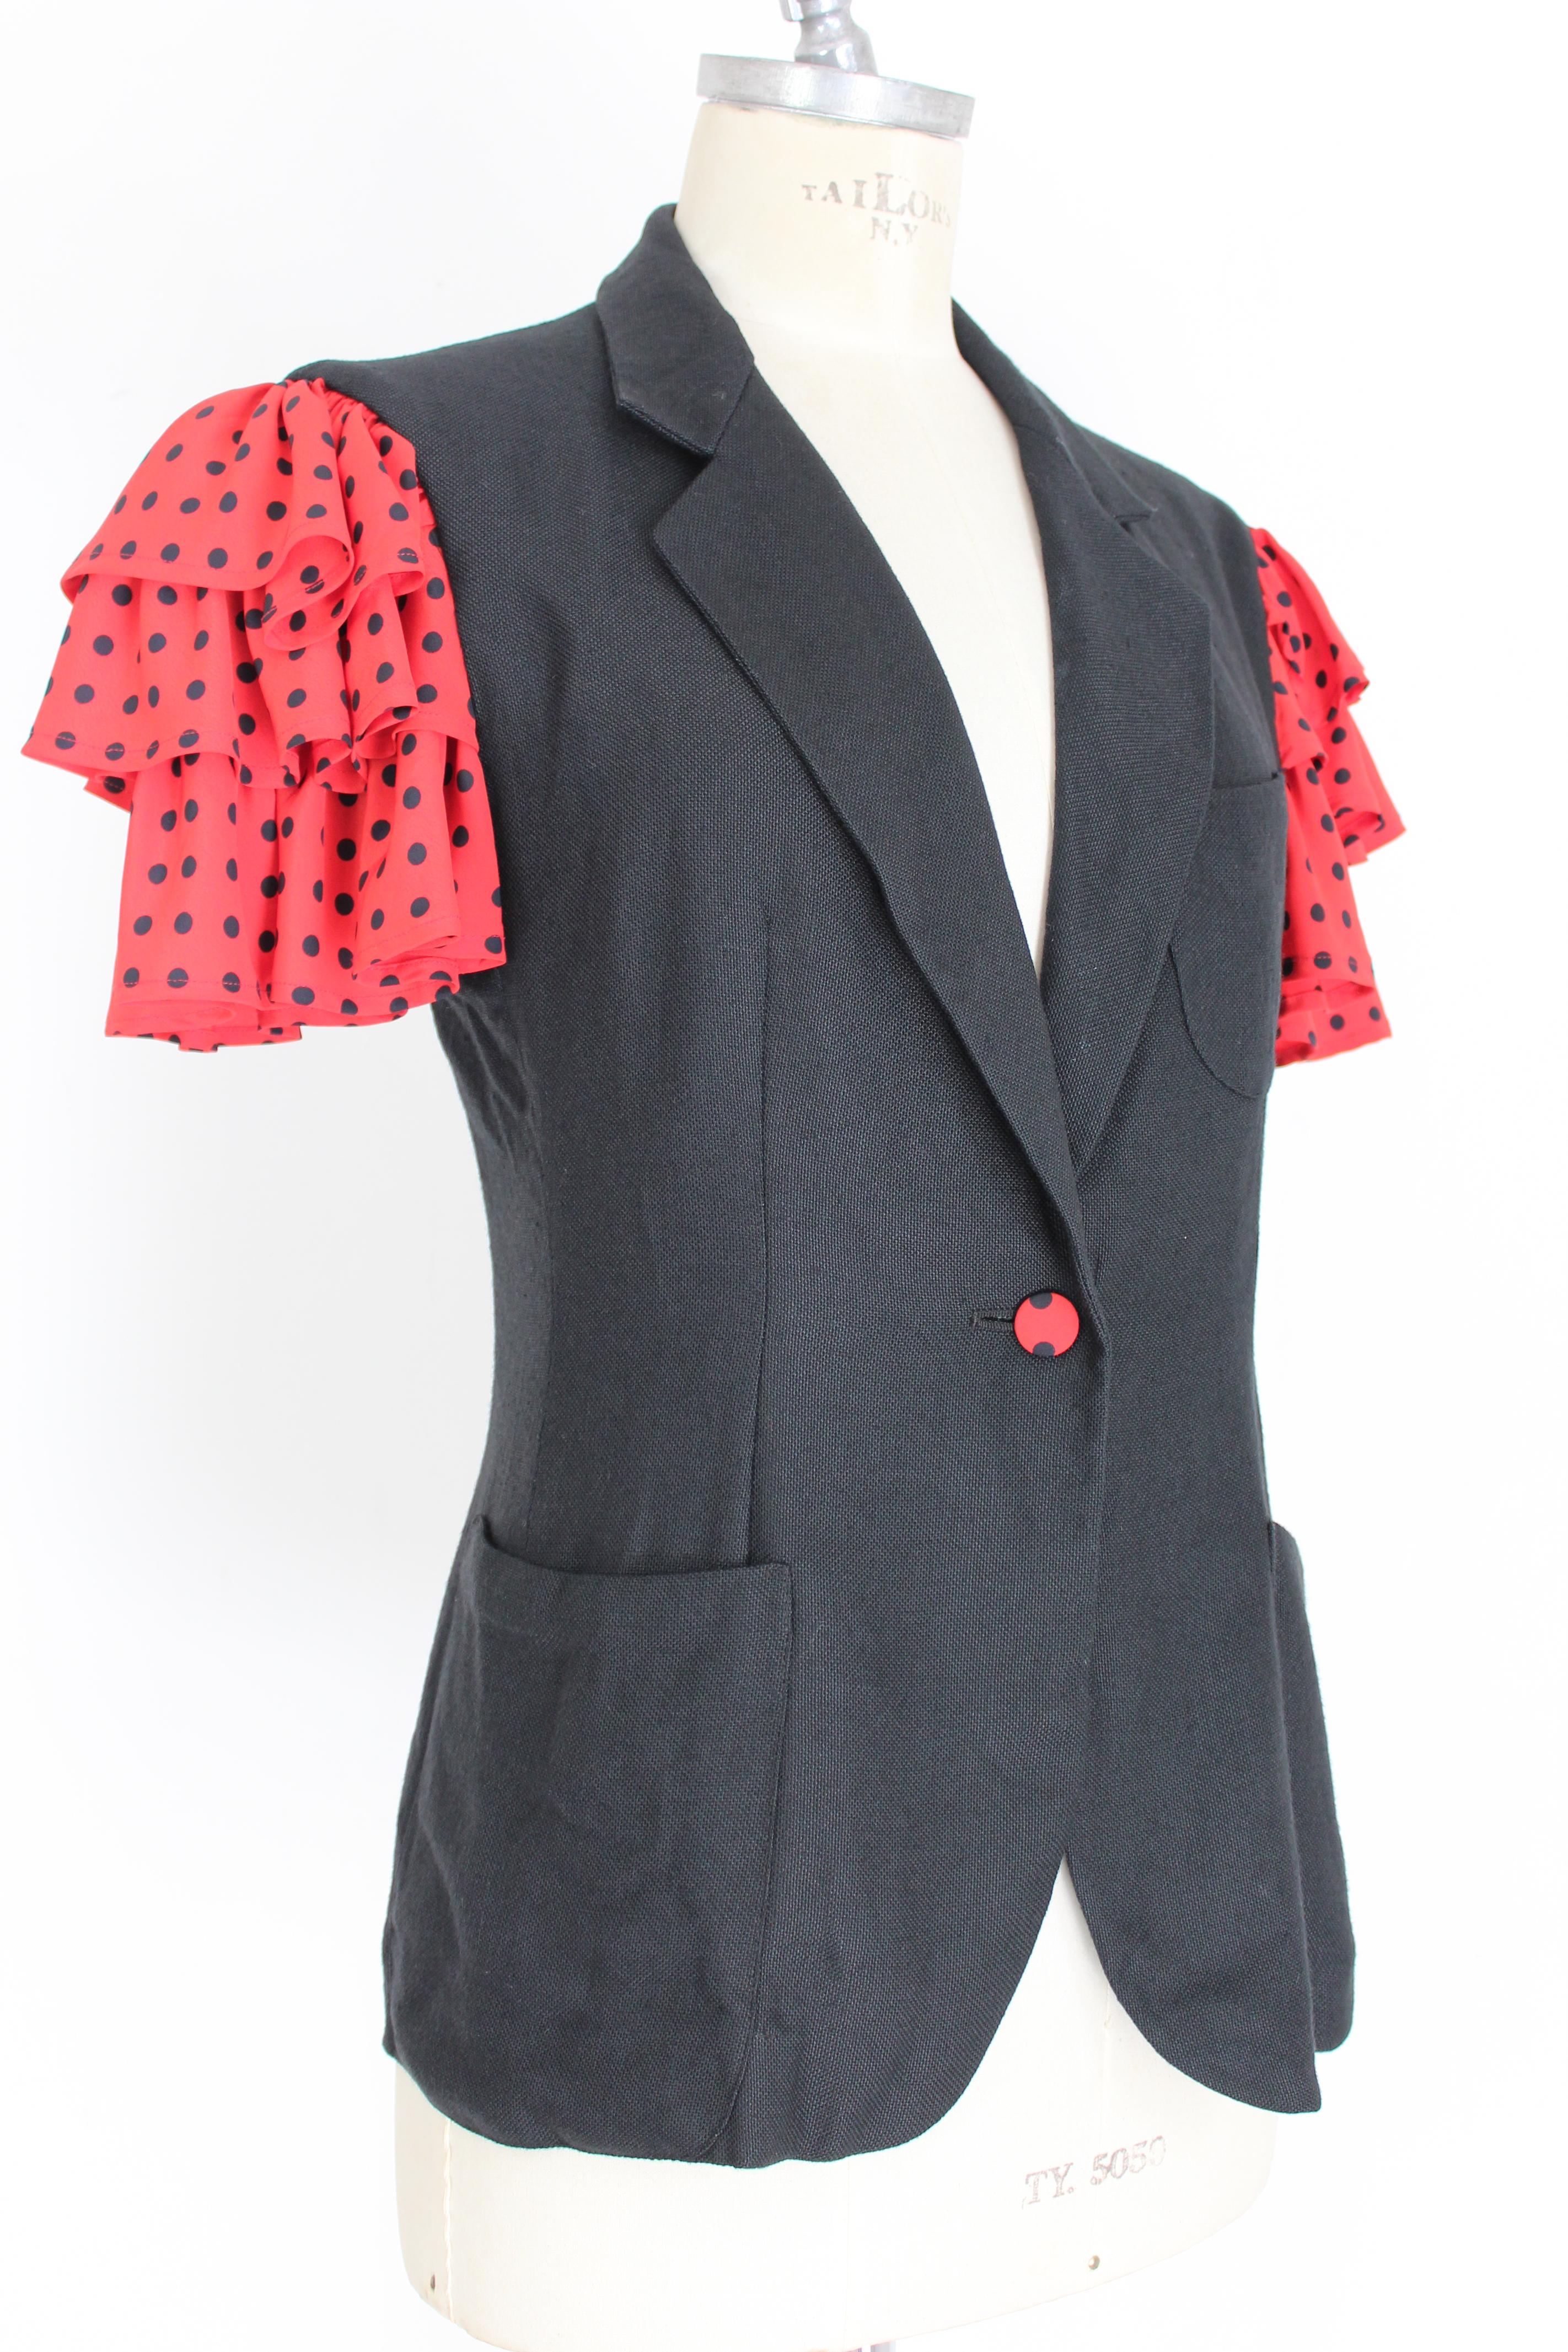 Moschino Red Black Polka Dot Cocktail Jacket and Dress Set 1990s Vintage 5